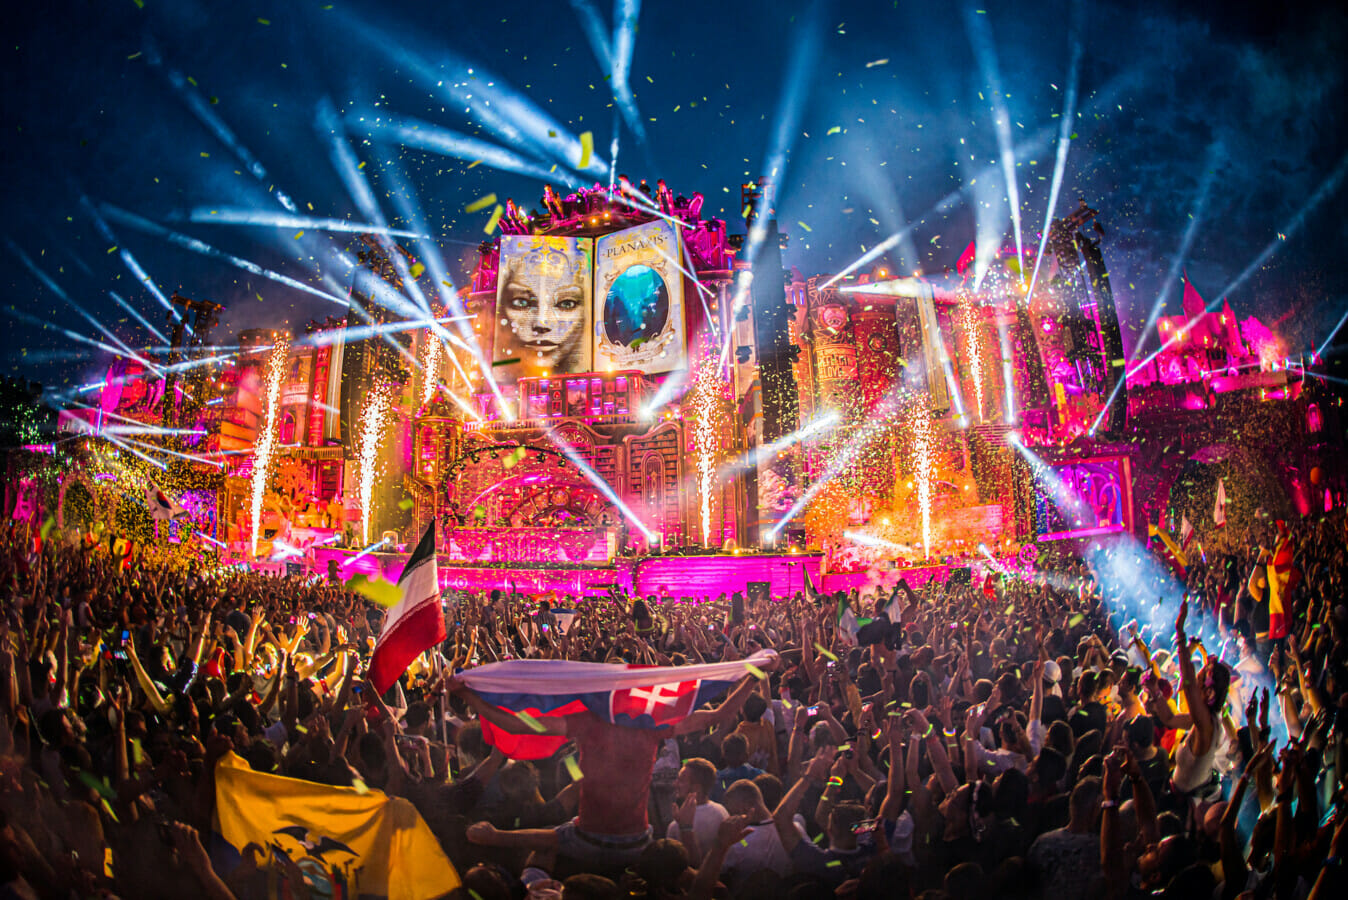 Coca-ColaTM  joins forces with Tomorrowland,  one of the biggest and most influential music festivals in the world